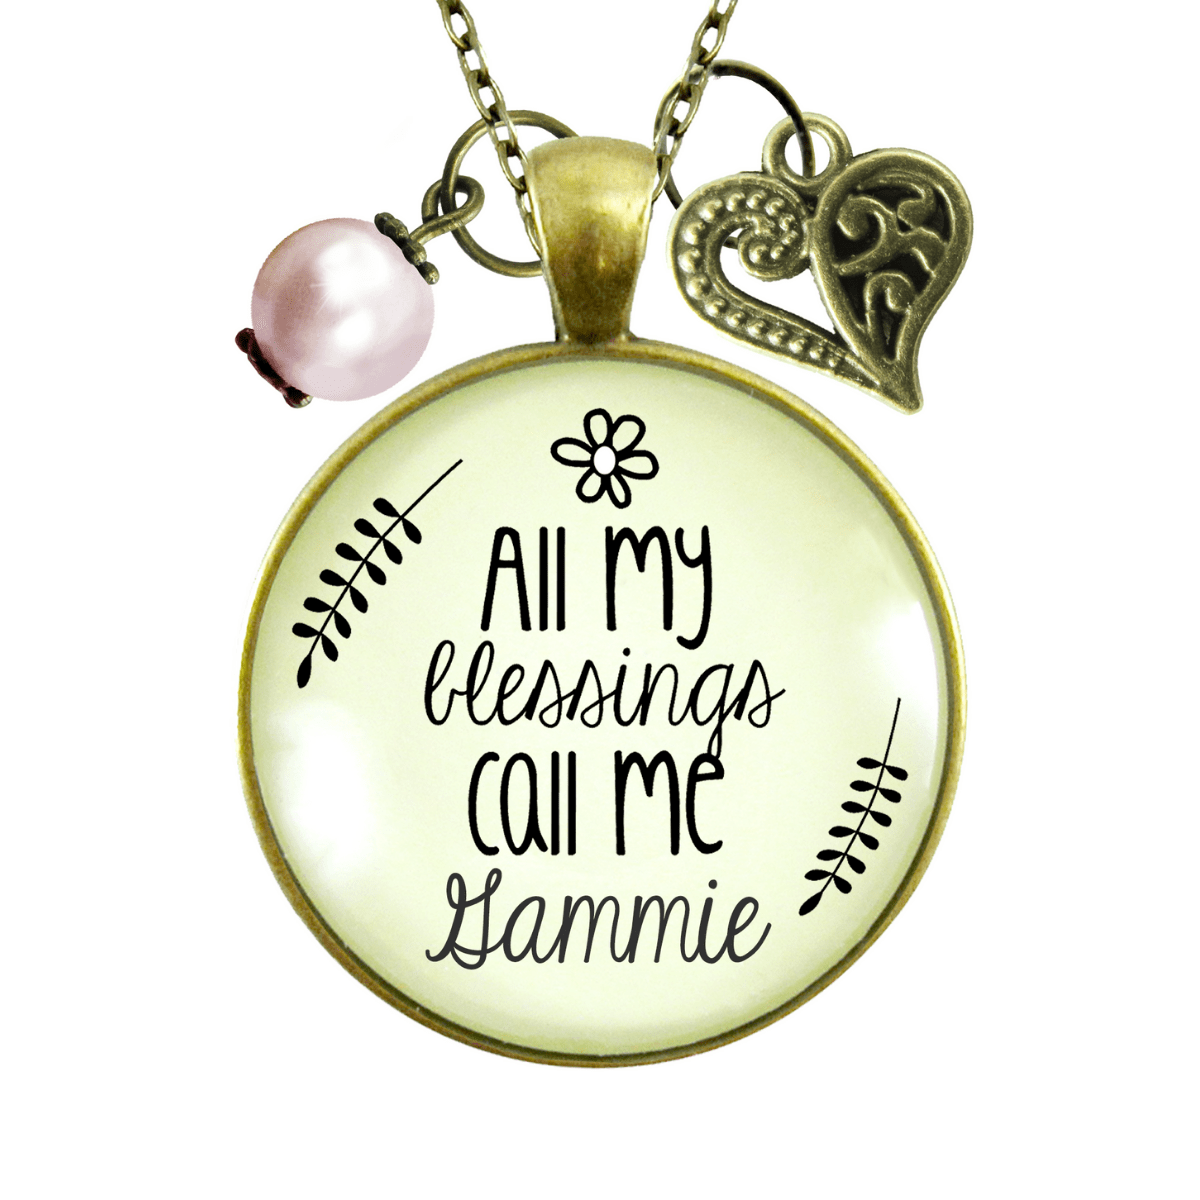 Gutsy Goodness Gammie Necklace All My Blessings Southern Grandma Womens Family Gift Jewelry - Gutsy Goodness;Gammie Necklace All My Blessings Southern Grandma Womens Family Gift Jewelry - Gutsy Goodness Handmade Jewelry Gifts